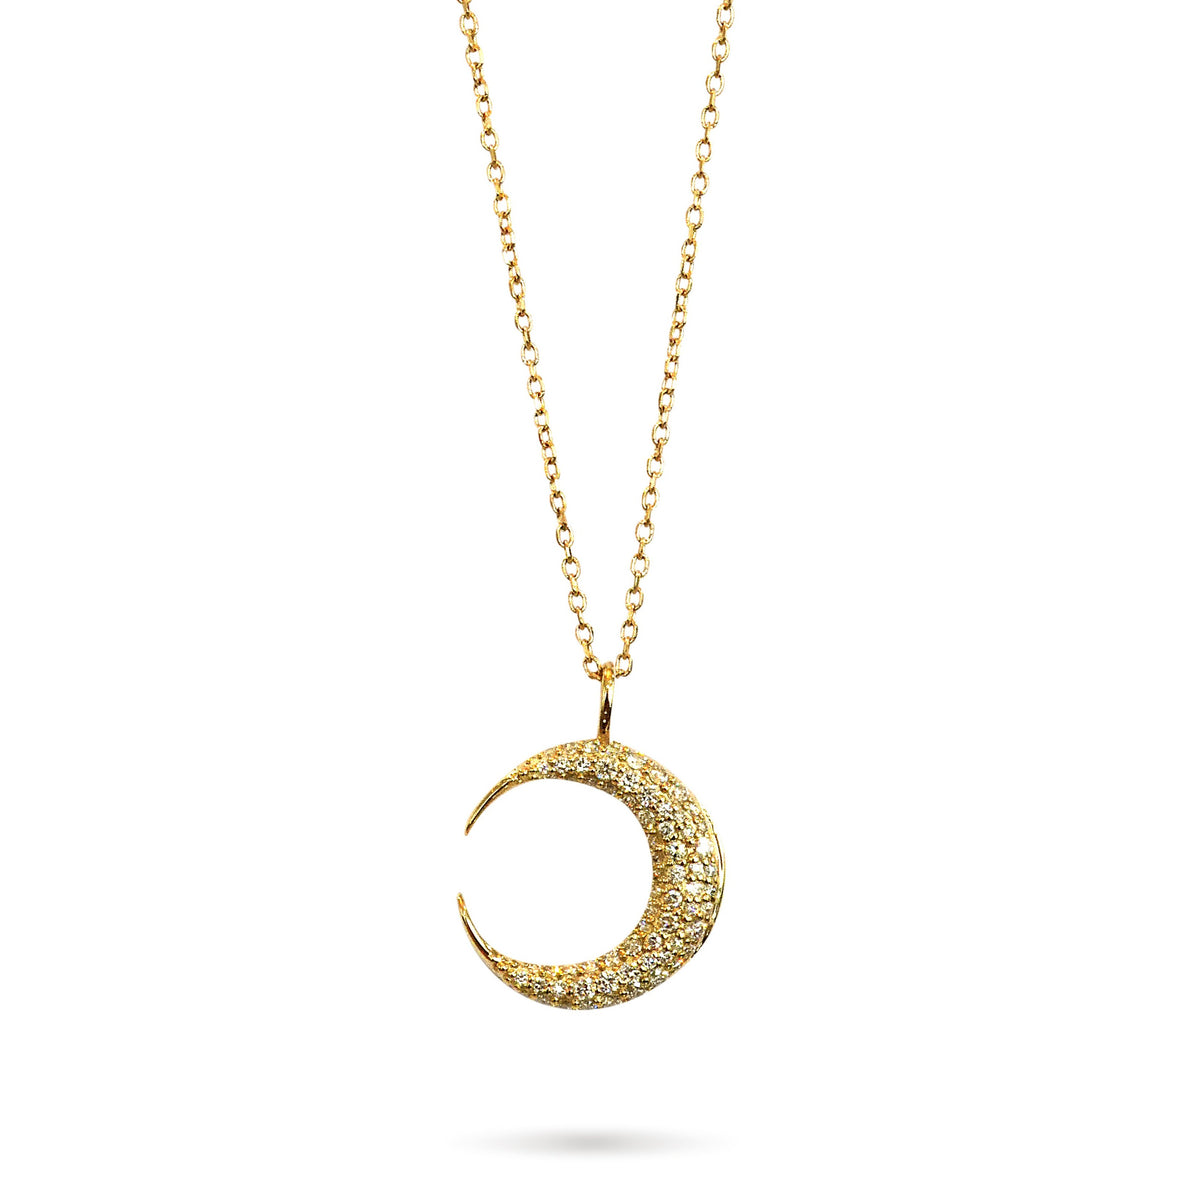 Details about   Crescent Half Moon Pendant Religious Handmade 925 Silver Pave Diamond Jewelry